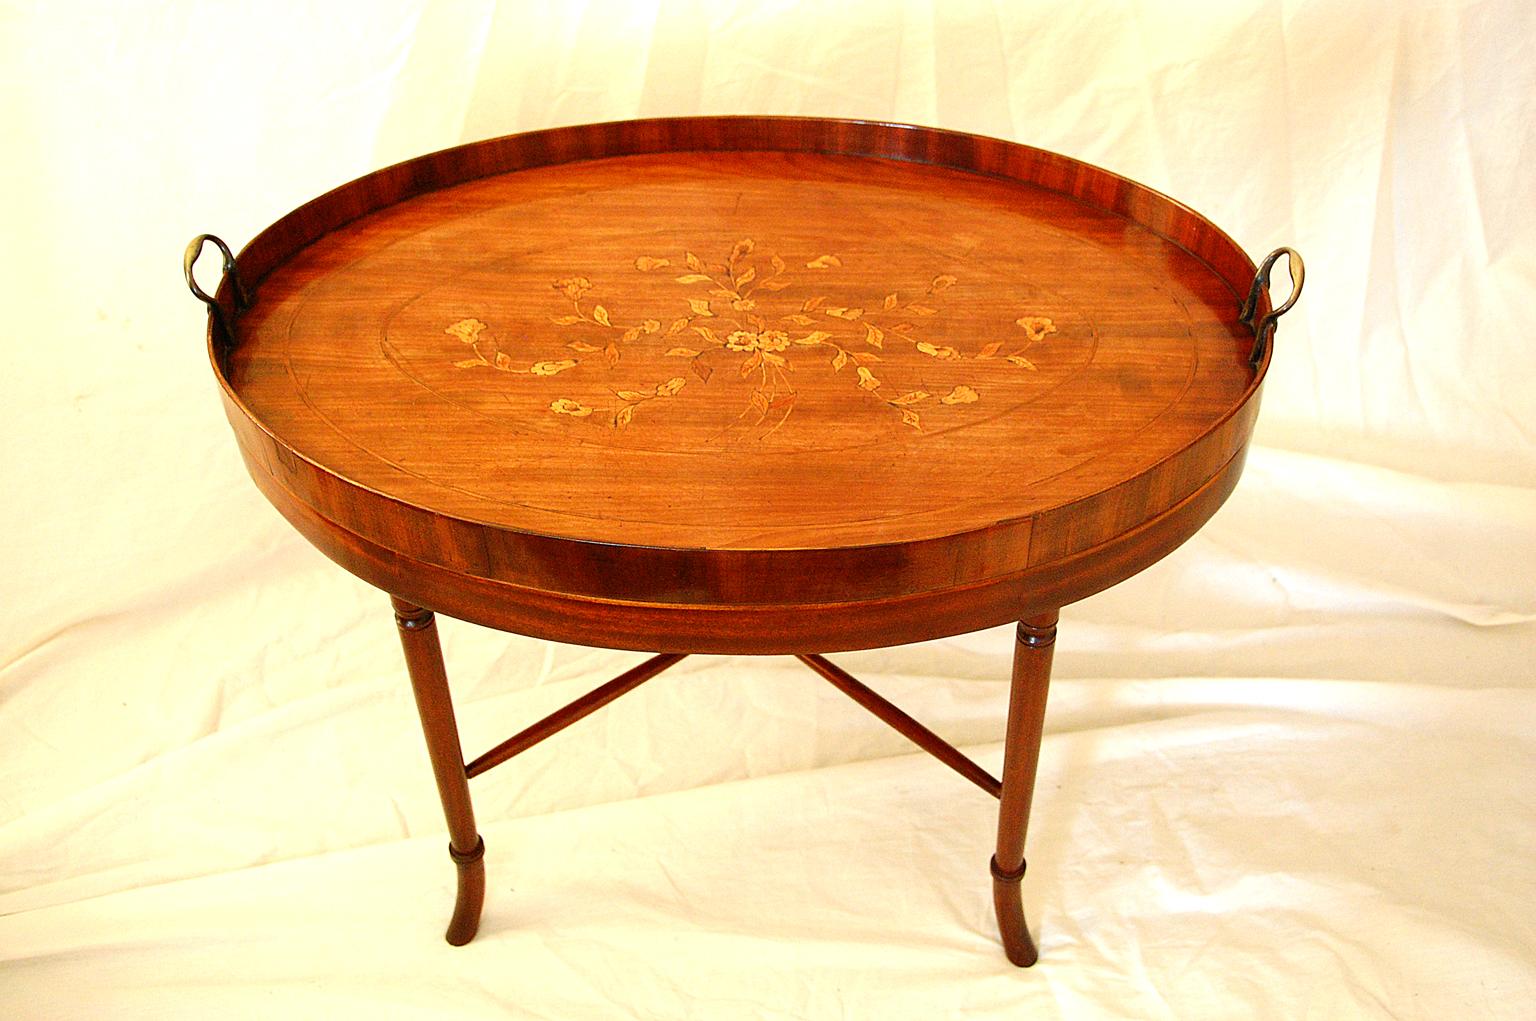 English Period Georgian Hepplewhite oval galleried butler's tray, mahogany inlaid with boxwood flowers and stringing, brass handles,. Now on handmade mahogany turned and splay legged stand, designed and created at The Farm. Perfect for use as a